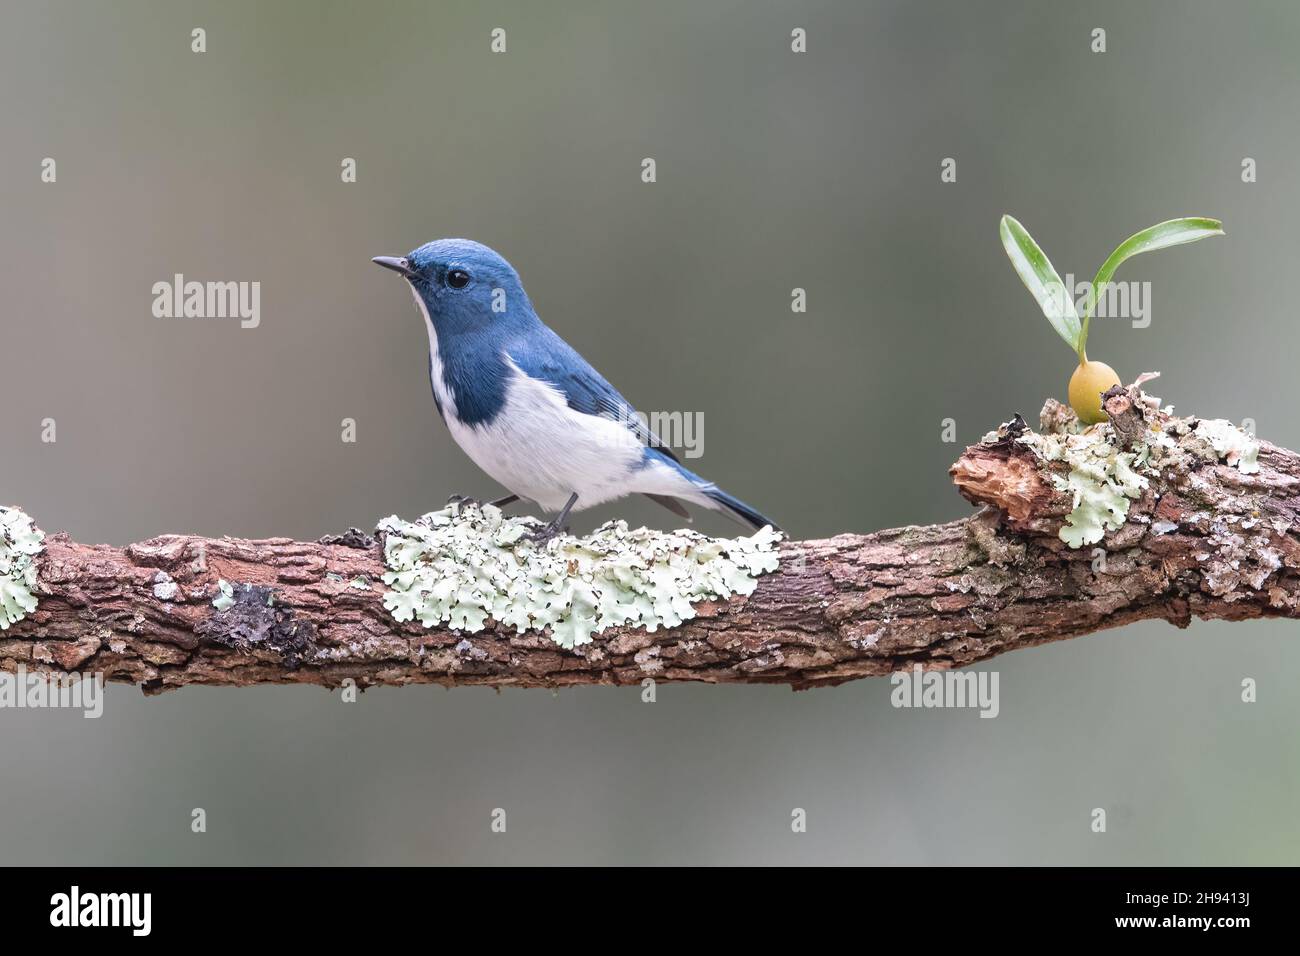 The ultramarine flycatcher or the white-browed blue flycatcher (Ficedula superciliaris) is a small arboreal Old World flycatcher in the ficedula famil Stock Photo